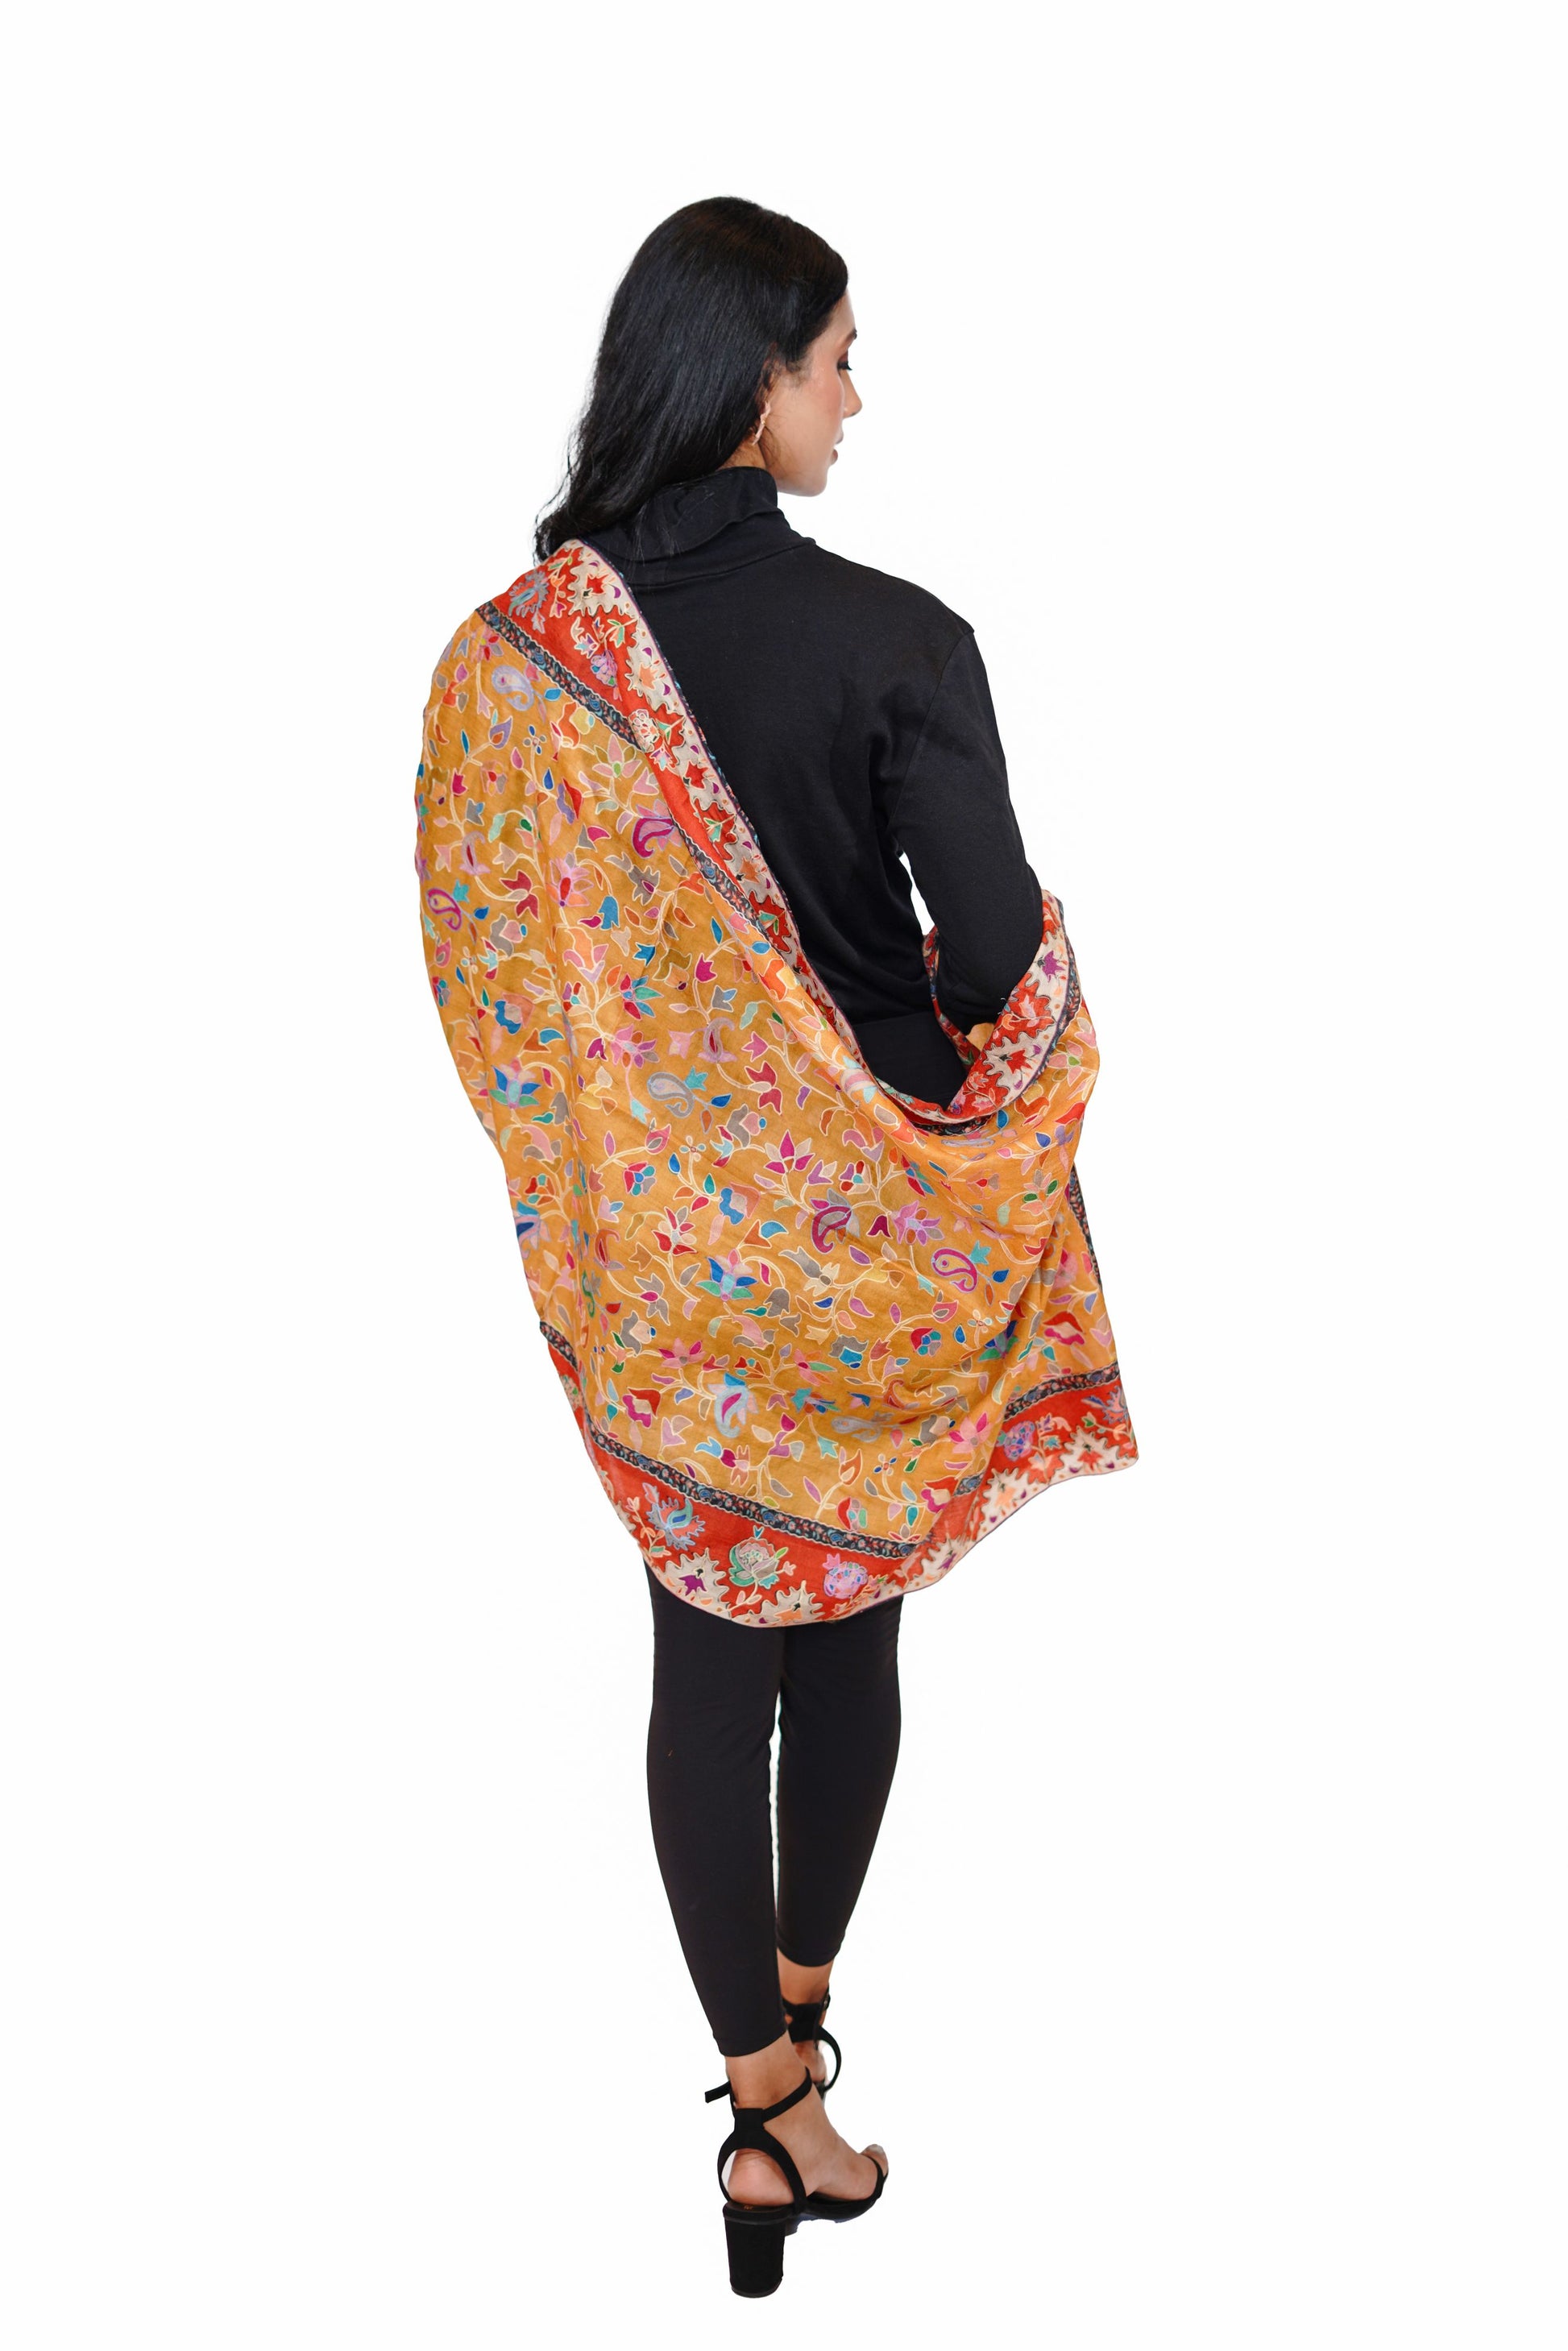 Heritage Hand Embroidered Printed Stole for Women - Mustard Yellow